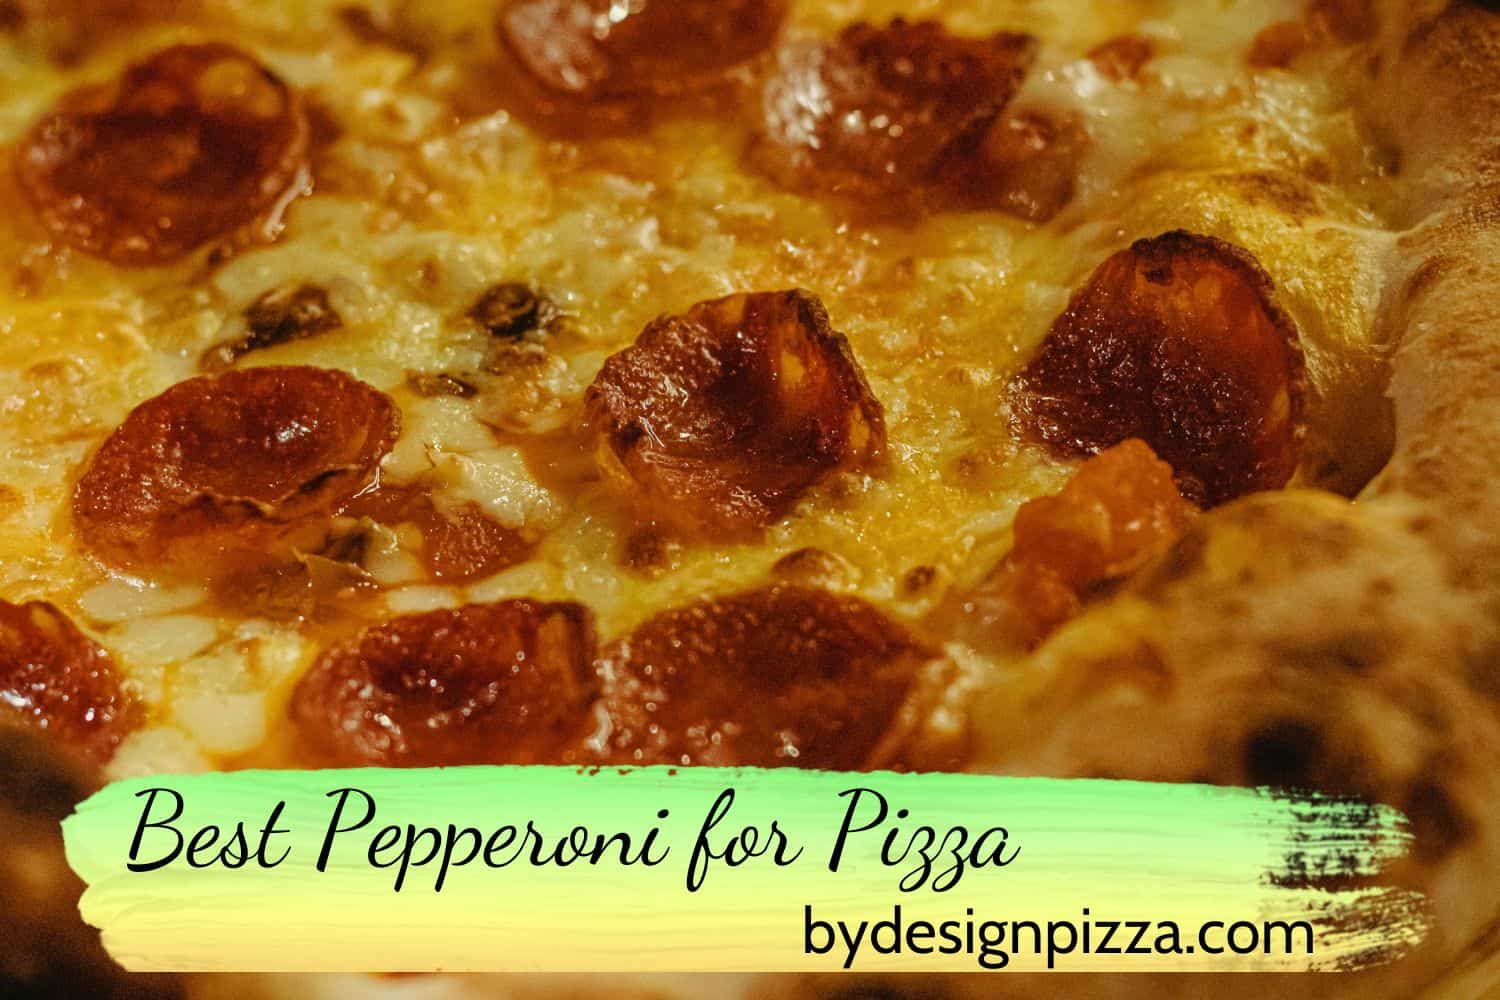 Best Pepperoni for Pizza